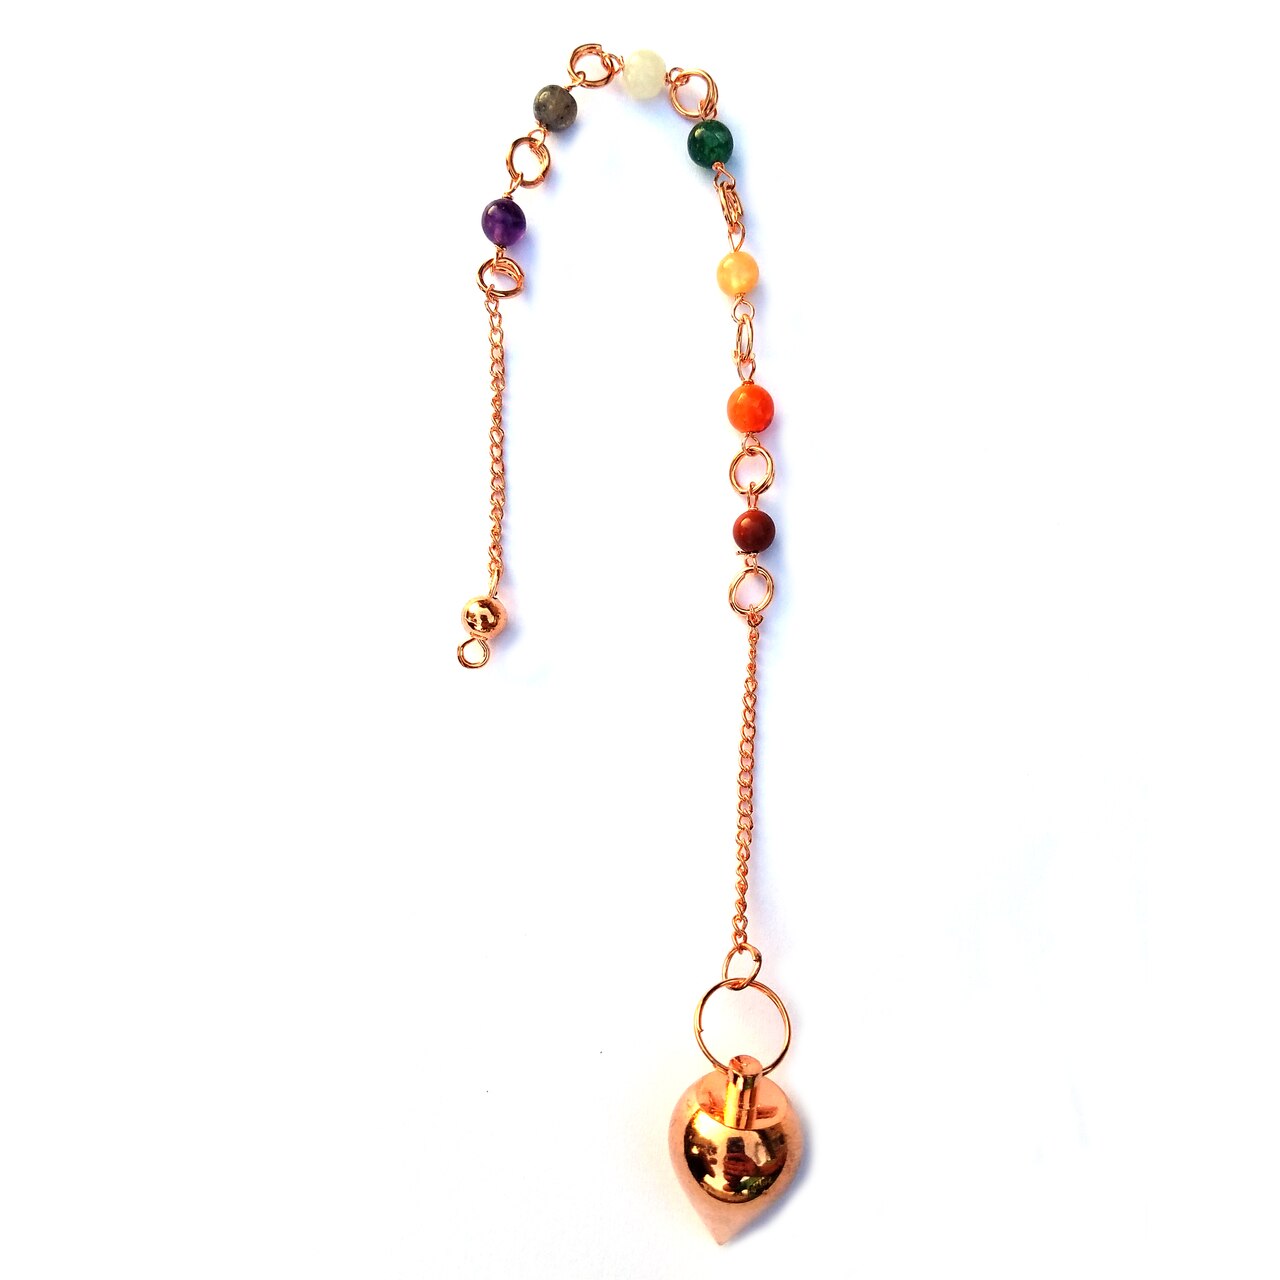 Chakra Copper Pendulum #2 with Sphere Bob for Divination, Scrying, Dowsing & Fortune Telling